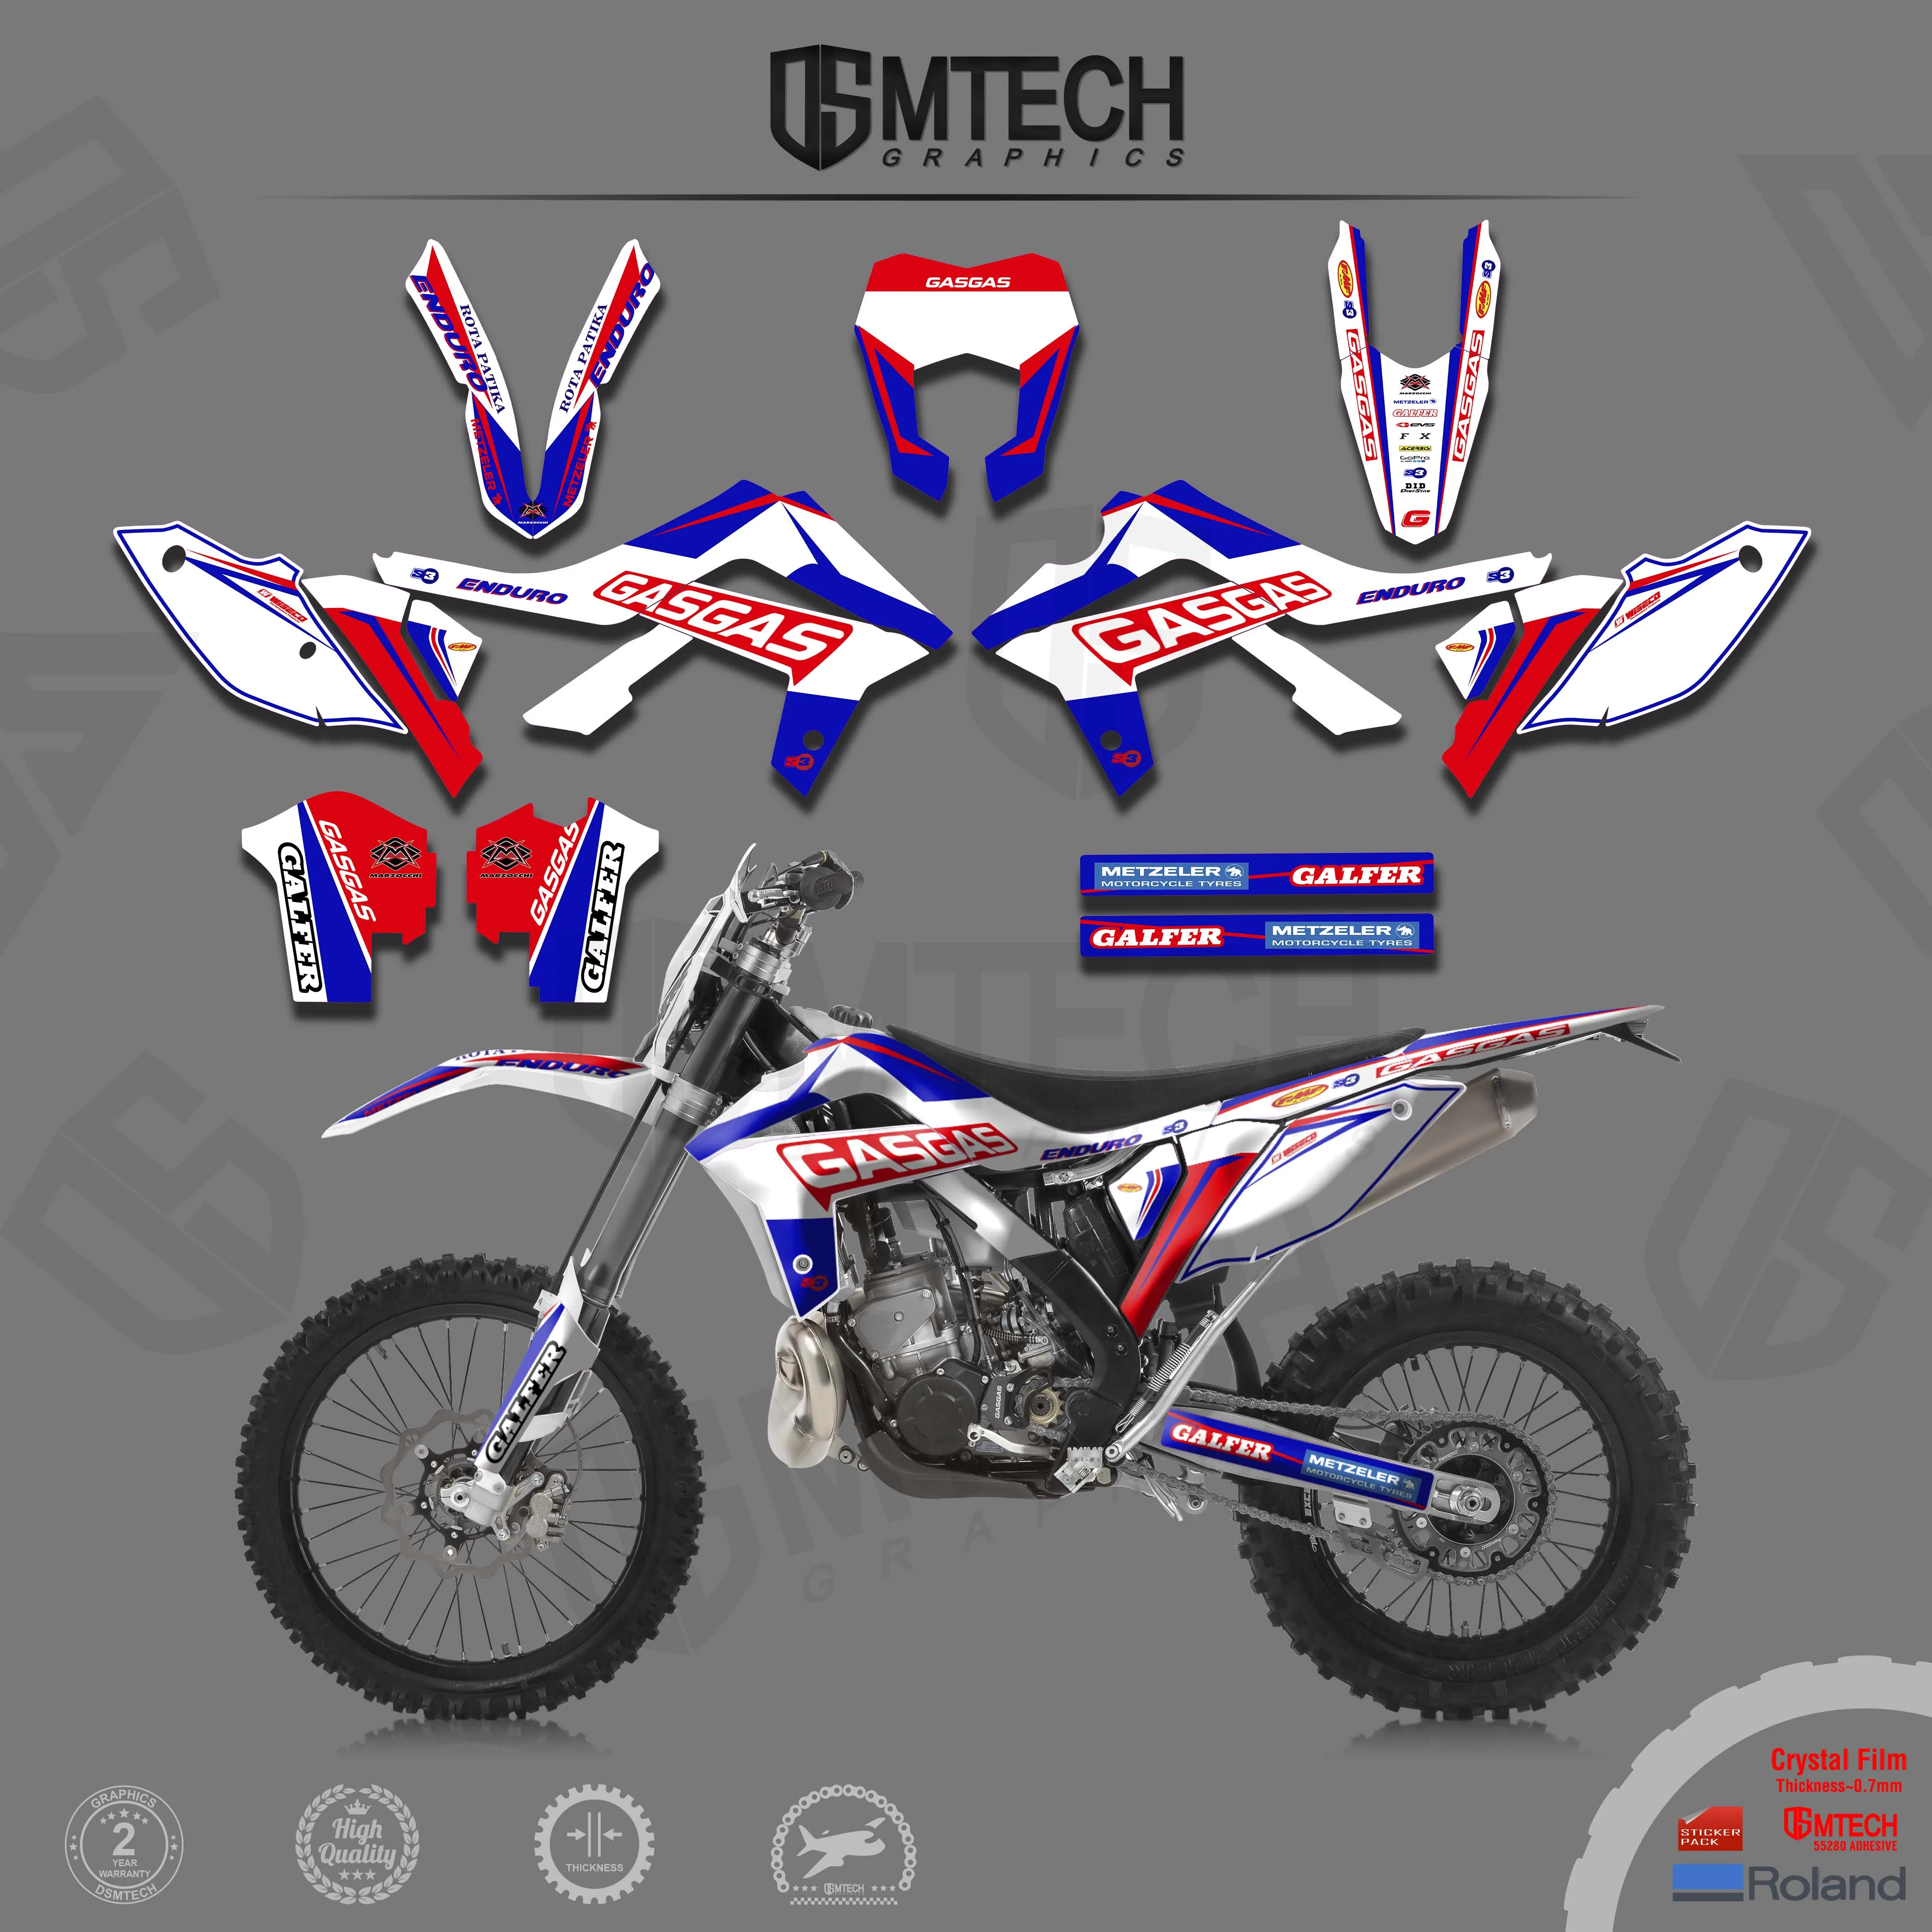 DSMTECH Team Motorcycle Sticker Graphic Decal Kit for GASGAS EC 2014 2015 2016 2017 Ec 14-17 001